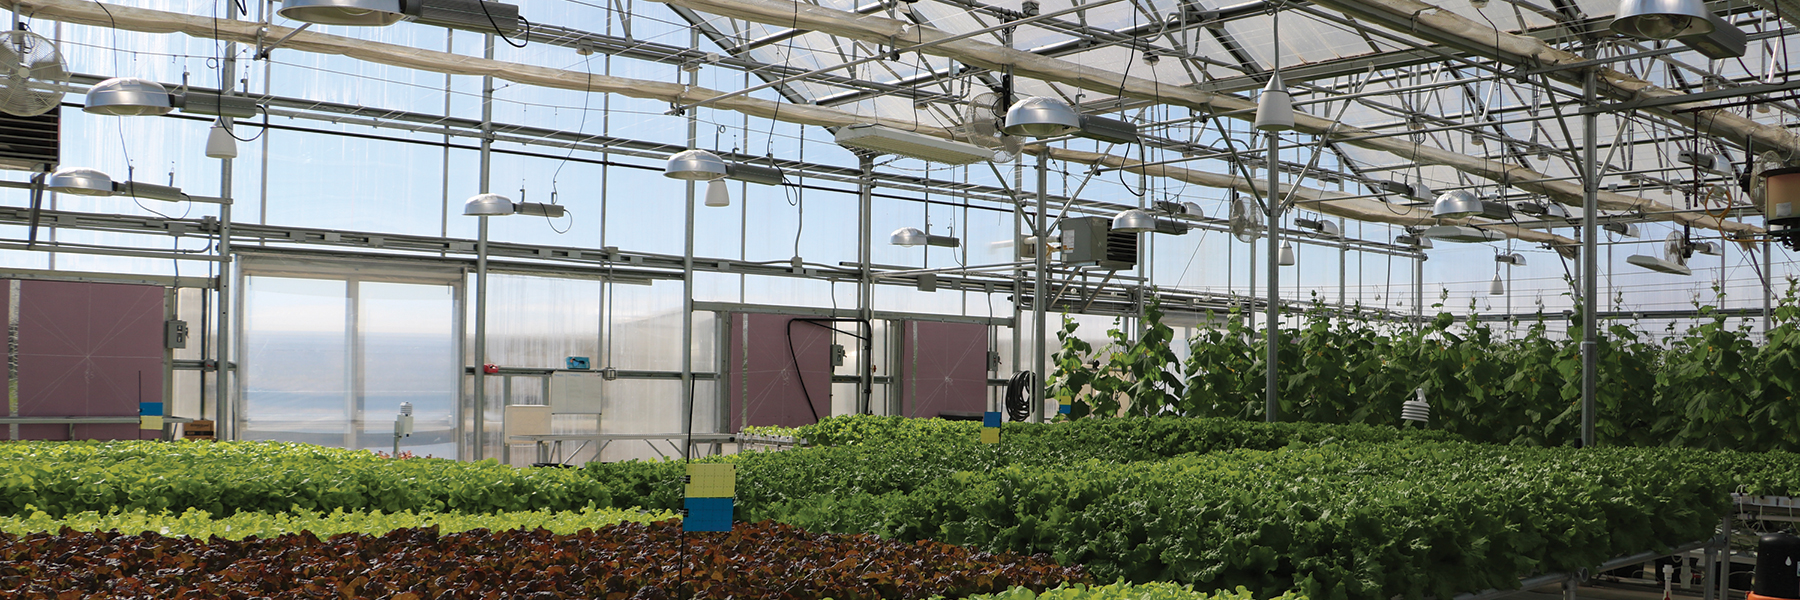 Commercial Greenhouse for Hydroponic growing